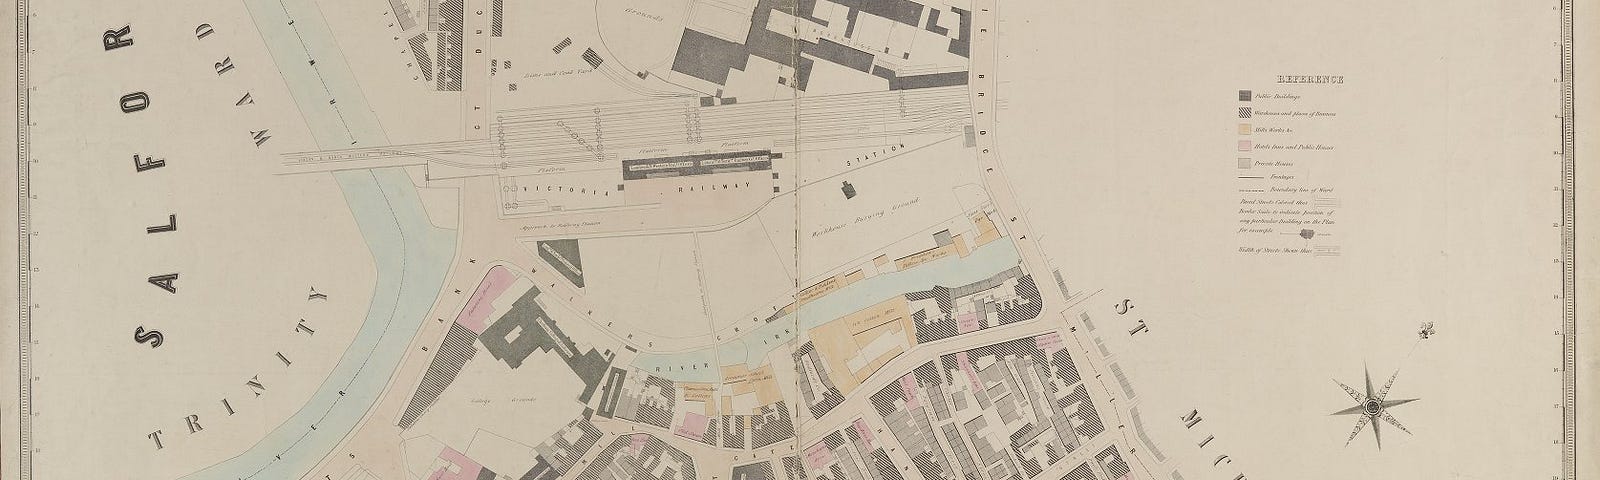 A very detailed map showing central Manchester in 1851, featuring Manchester Cathedral and Victoria Railway station. Public houses are coloured pink and mills and industrial works are coloured orange.